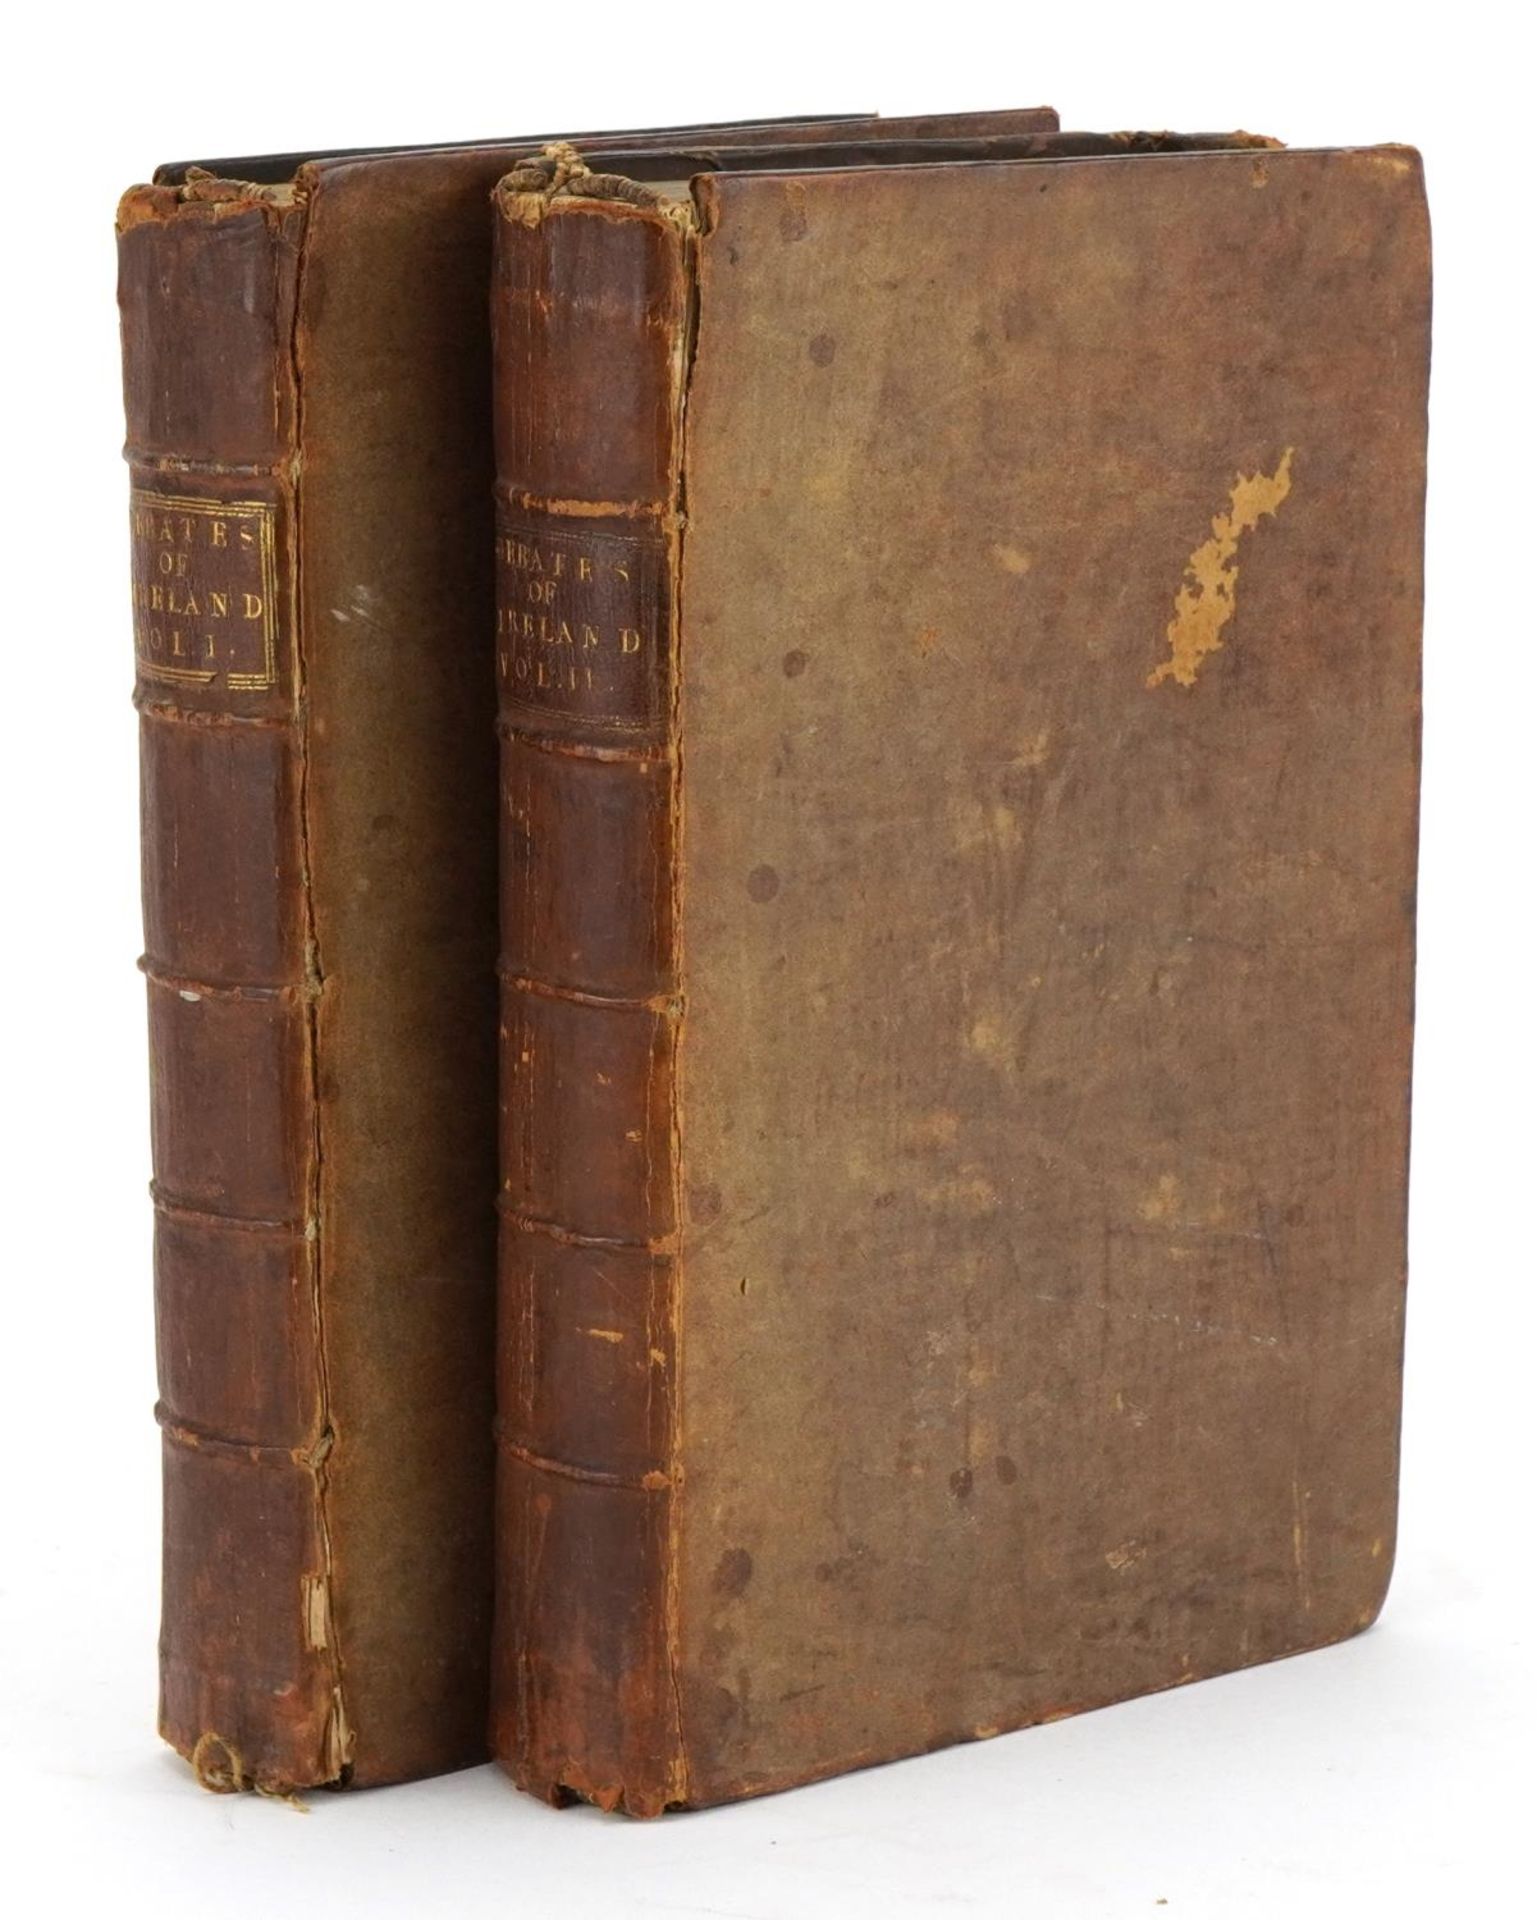 Two 18th century hardback books comprising Debates Relative to the Affairs of Ireland in the Years